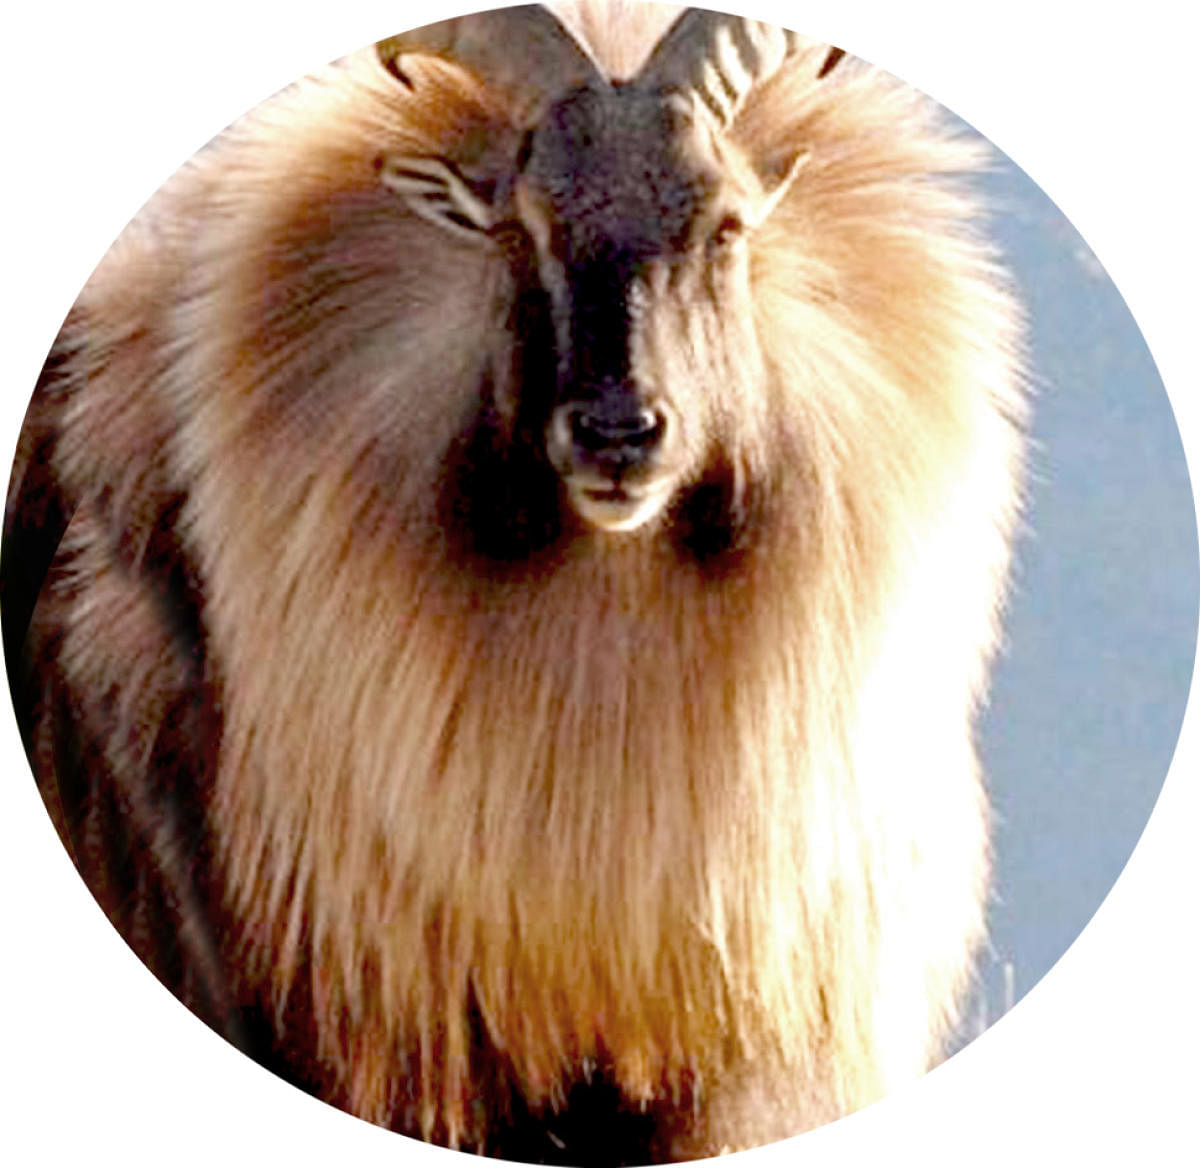 Himalayan tahr (Hemitragus jemlahicus)  Now an invasive species in many countries around the world, these large ungulates are native to the Himalayan habitat.